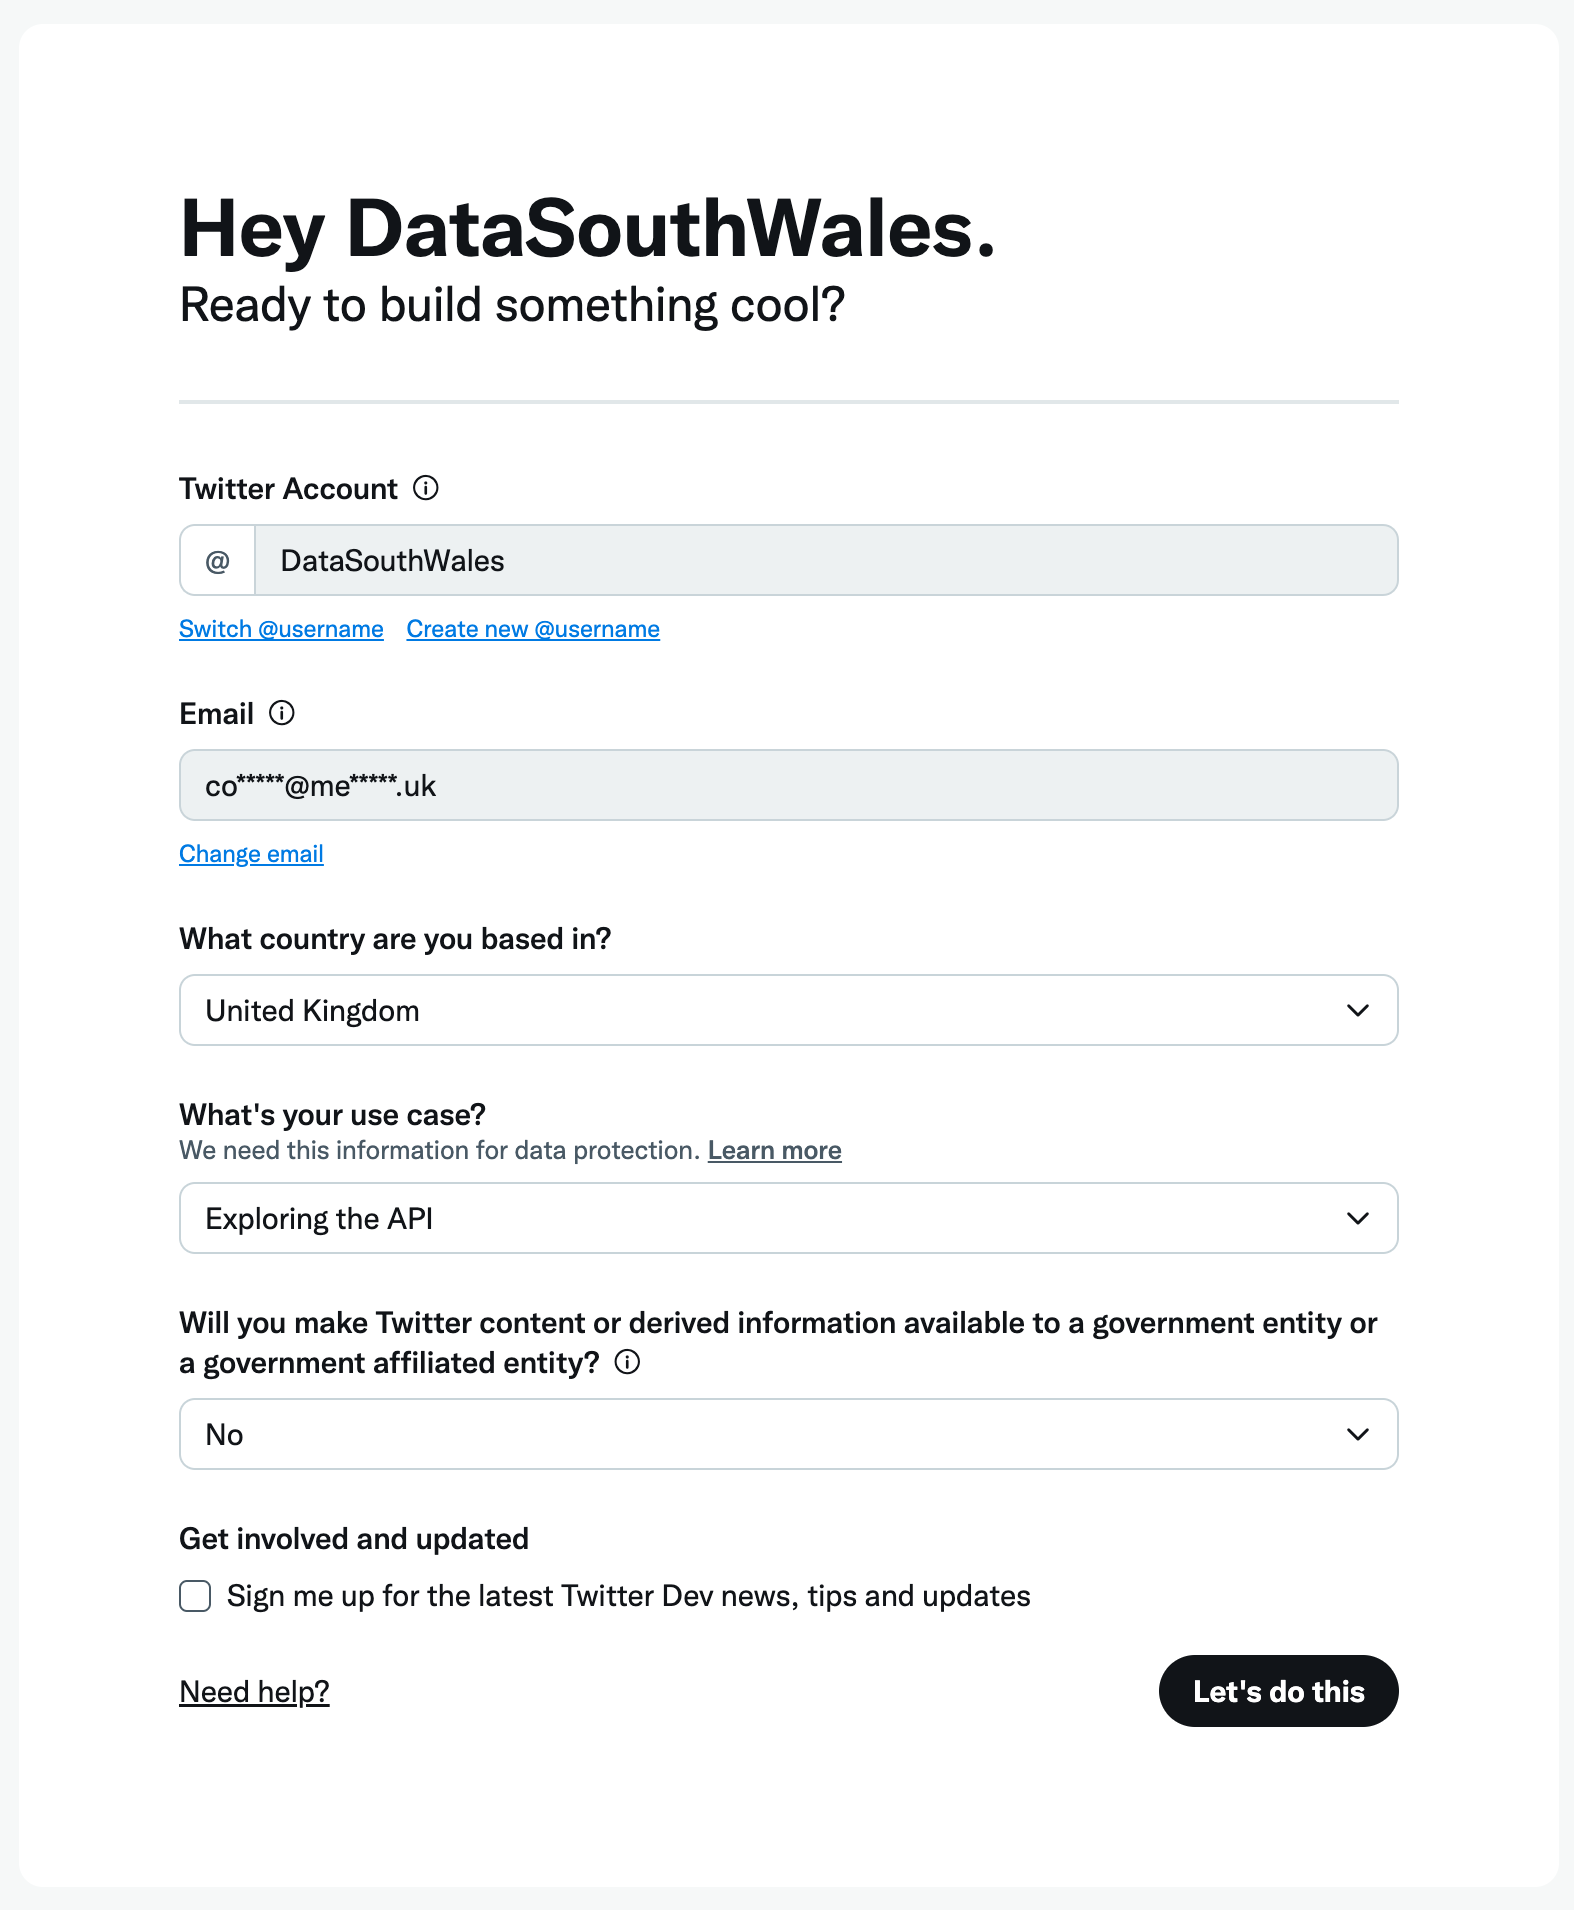 The first screen of the application process has multiple questions, you twitter account, which country you are in, what your use case is and requires you to agree to not share data with certain governments